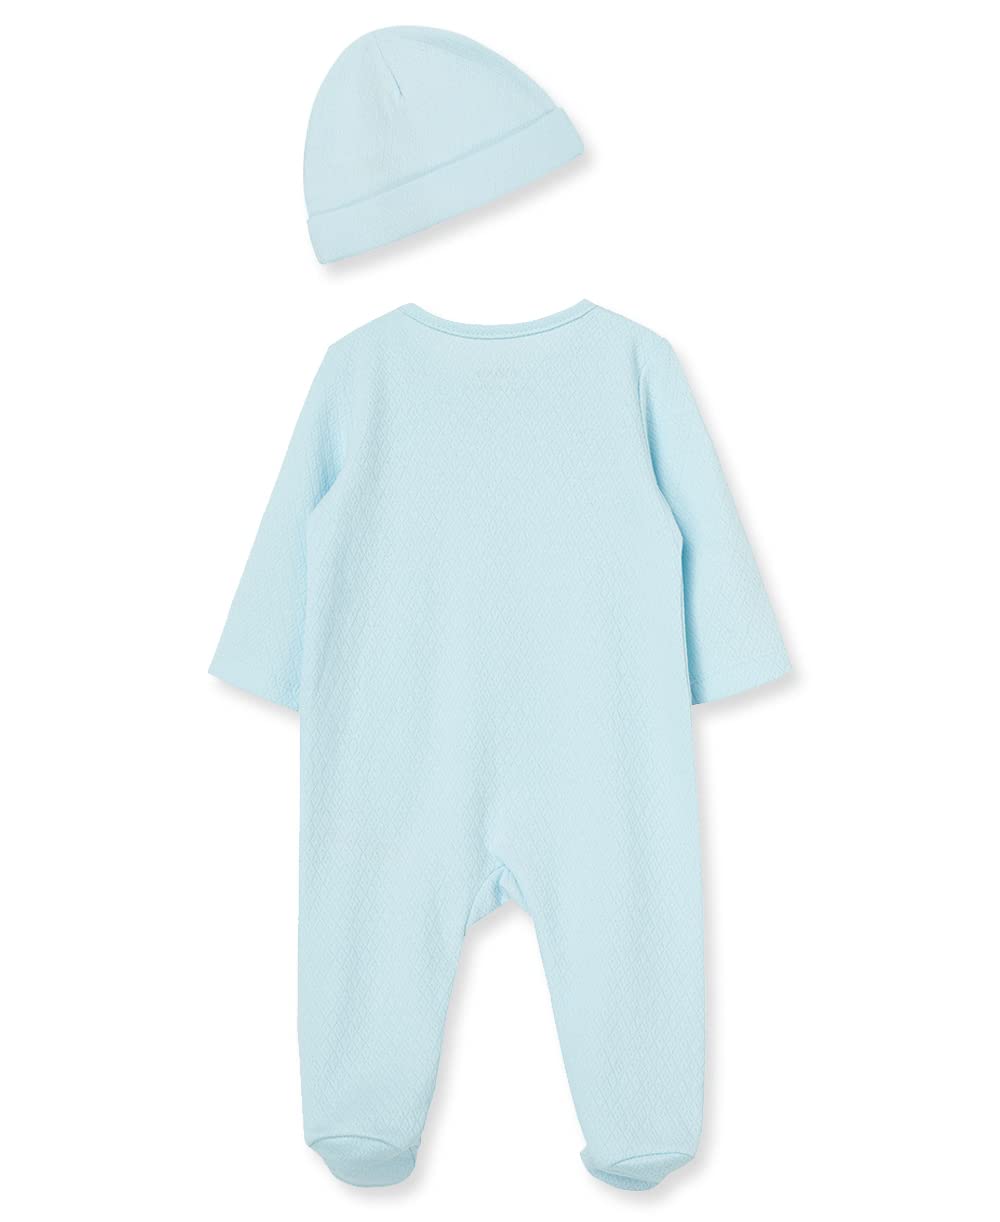 Little Me Baby Boys' 2-Piece Welcome to the World Footie and Cap Set, Preemie